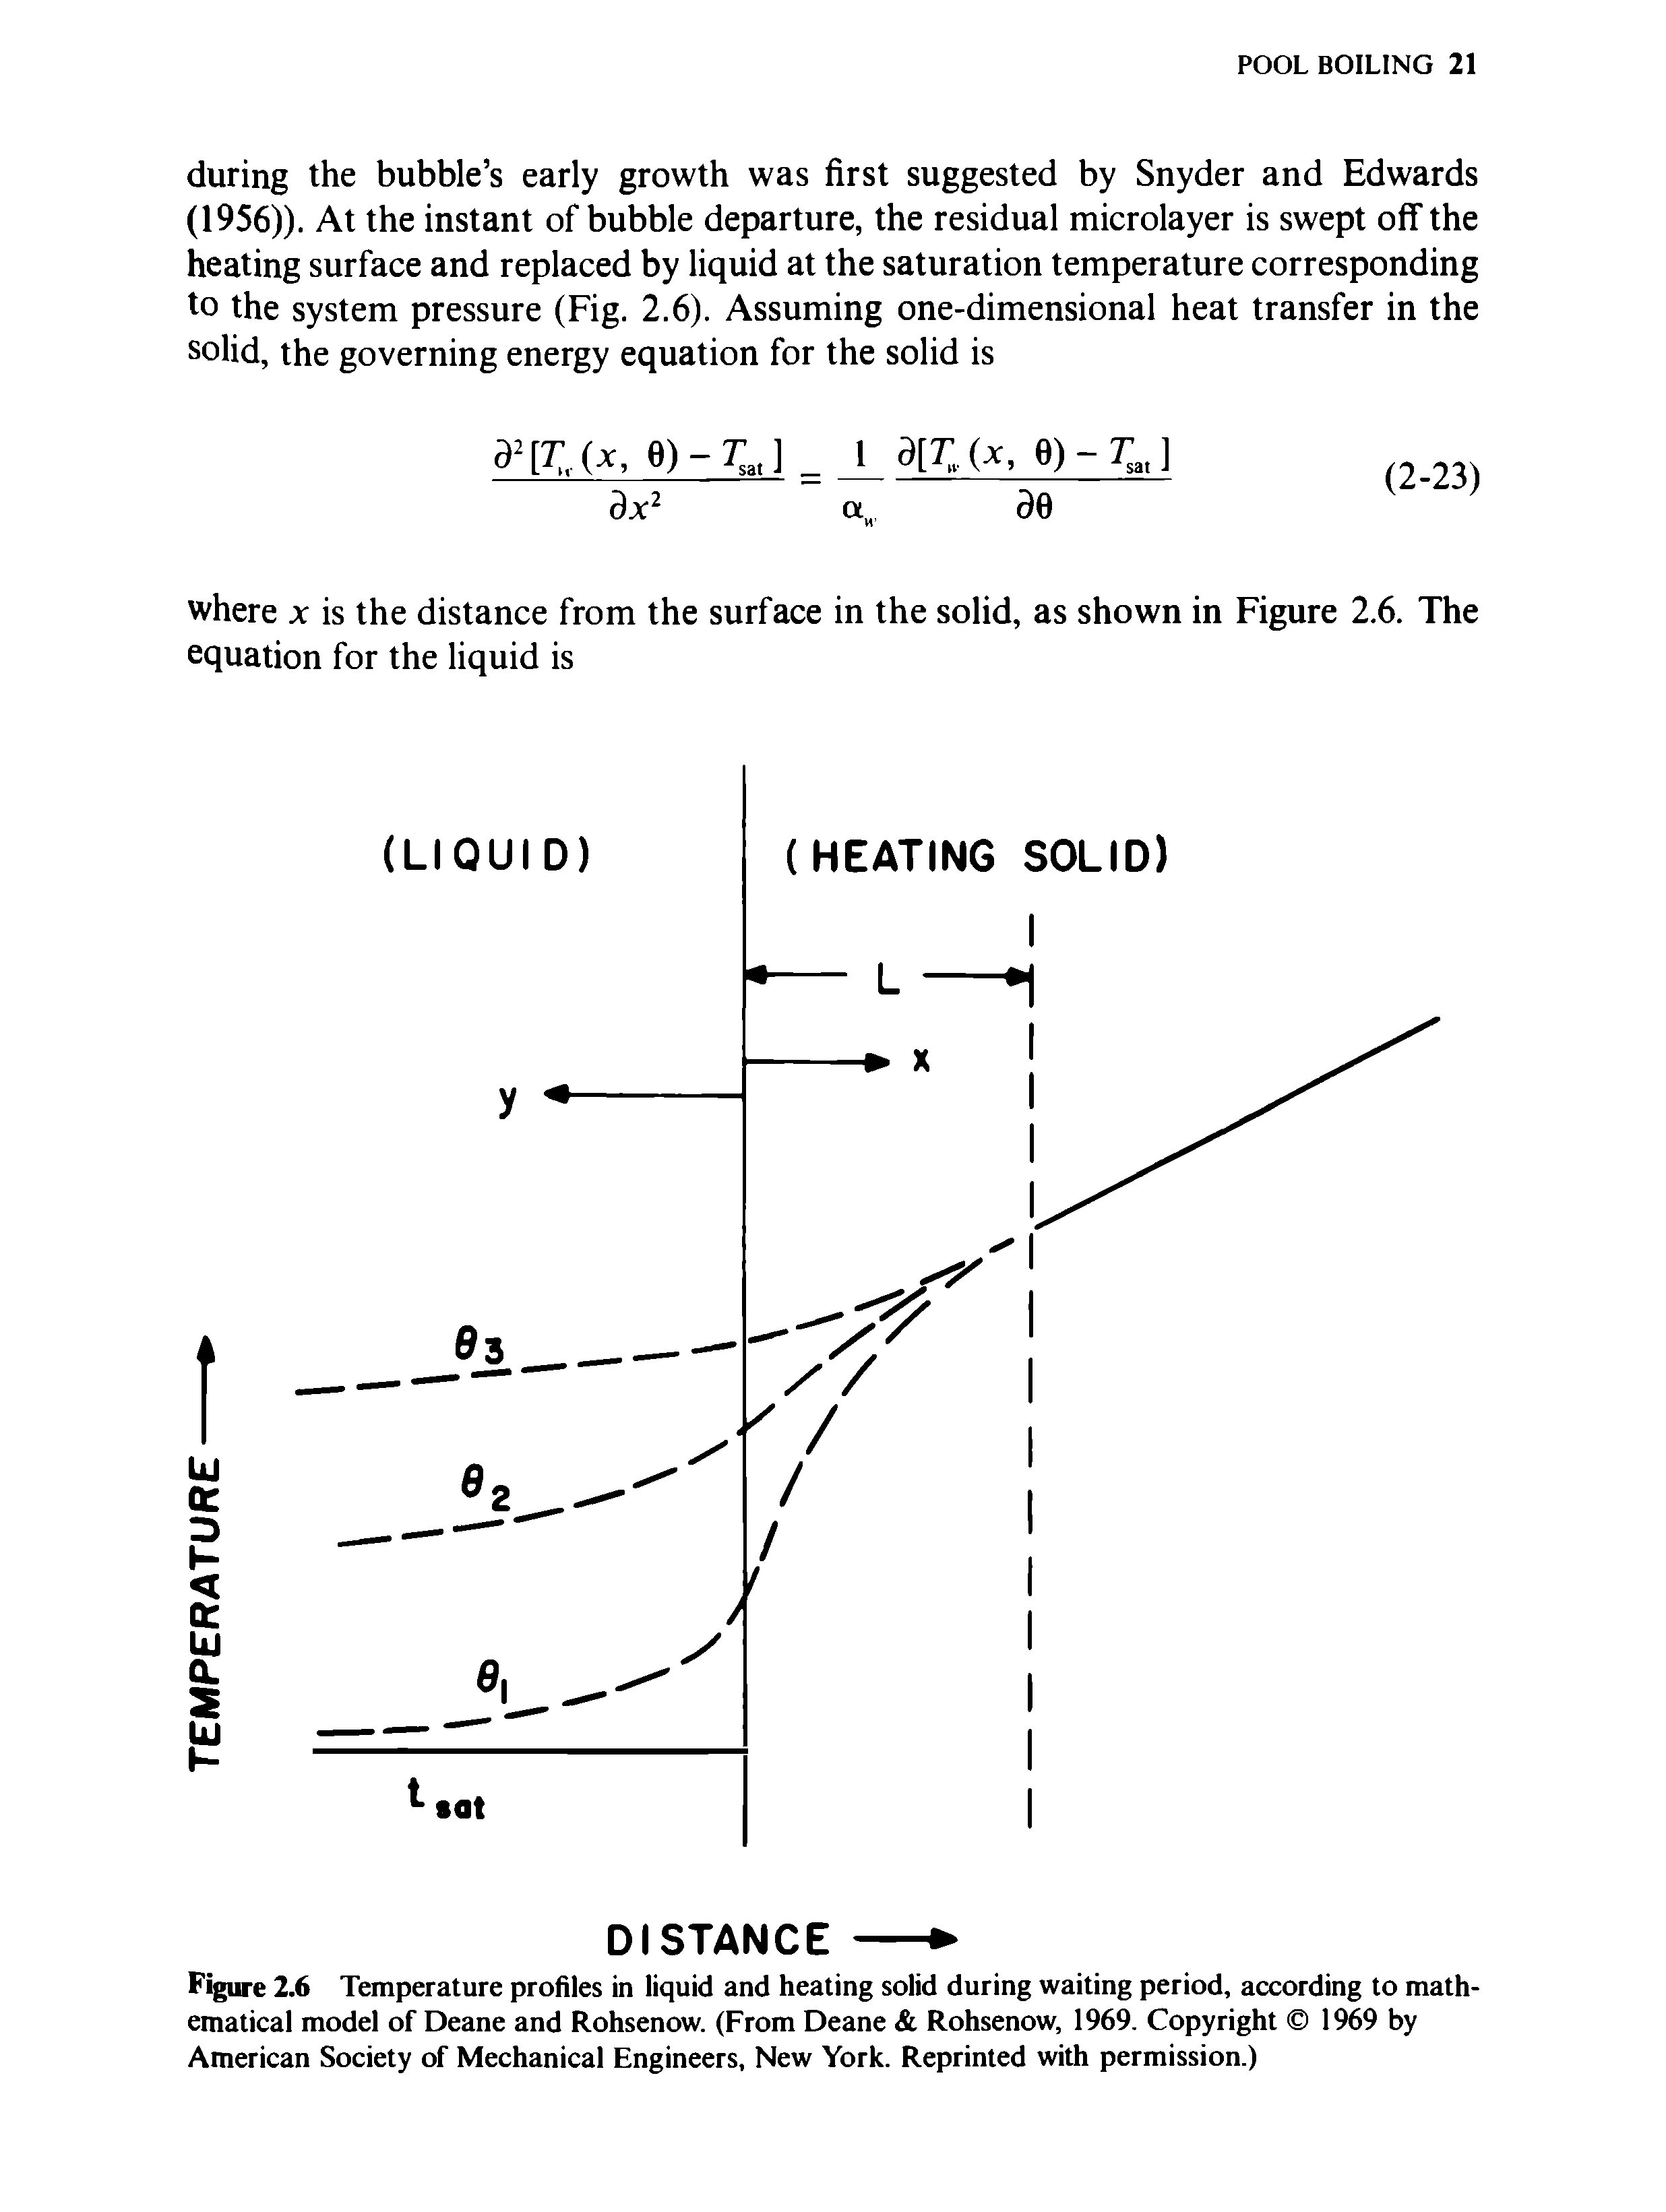 Figure 2.6 Temperature profiles in liquid and heating solid during waiting period, according to mathematical model of Deane and Rohsenow. (From Deane Rohsenow, 1969. Copyright 1969 by American Society of Mechanical Engineers, New York. Reprinted with permission.)...